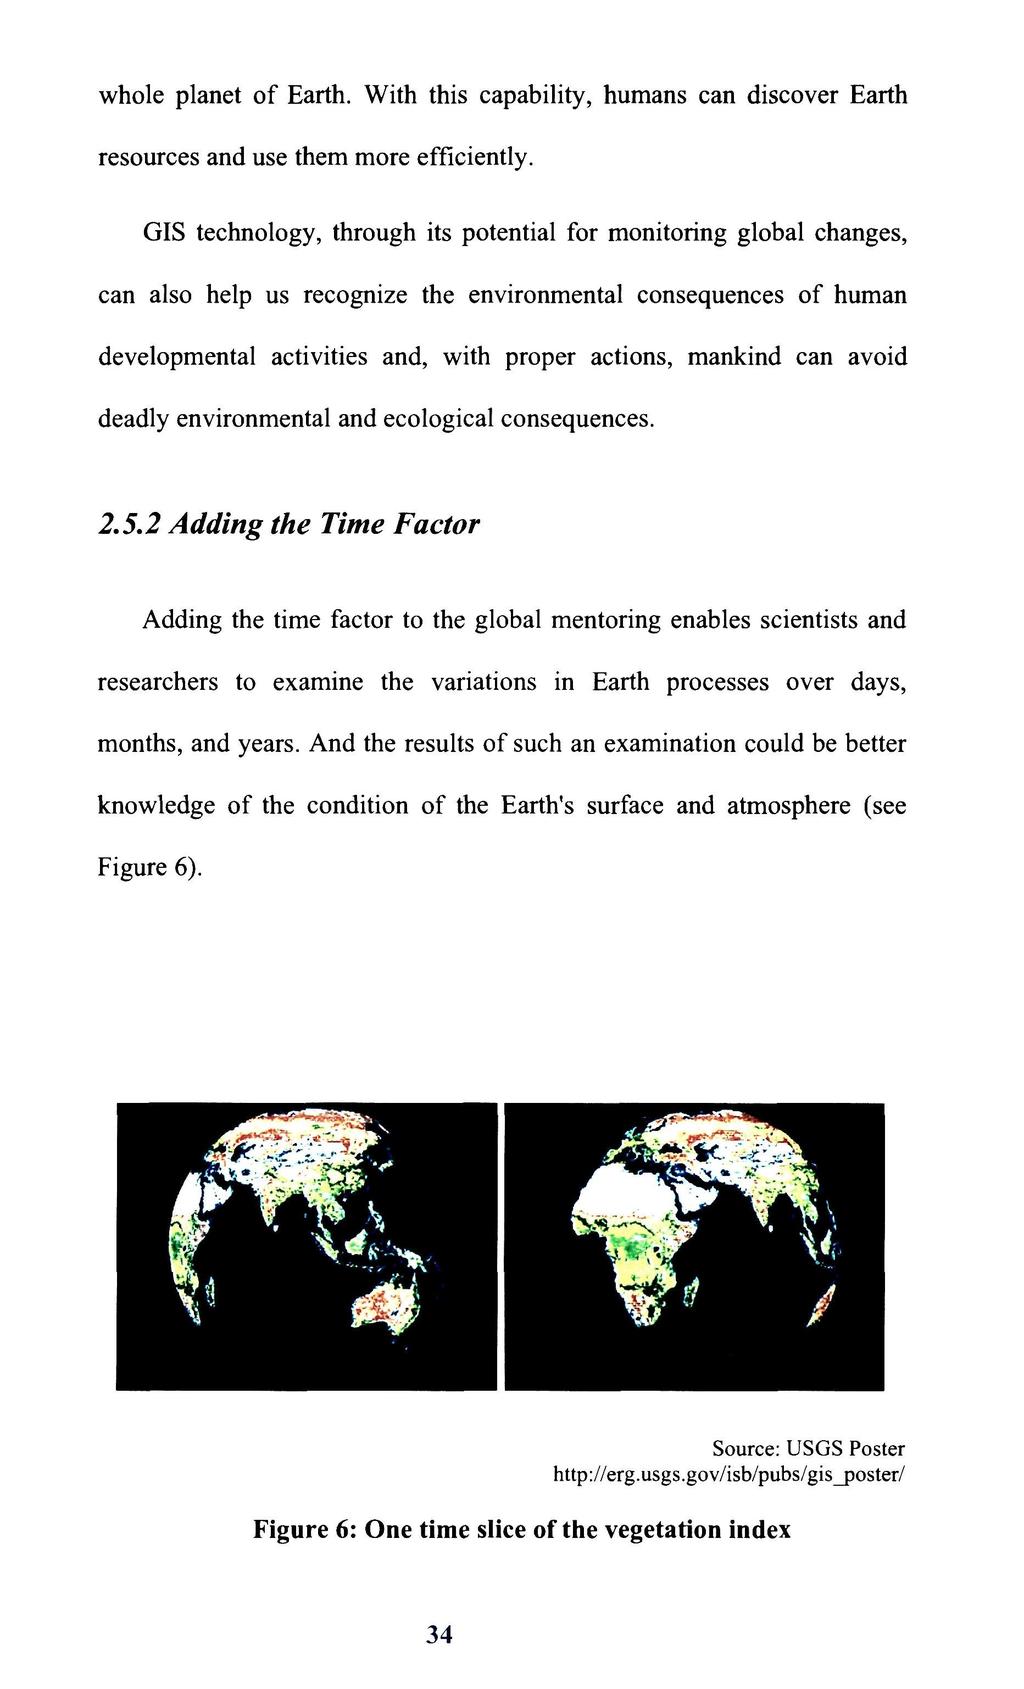 whole planet of Earth. With this capability, humans can discover Earth resources and use them more efficiently.